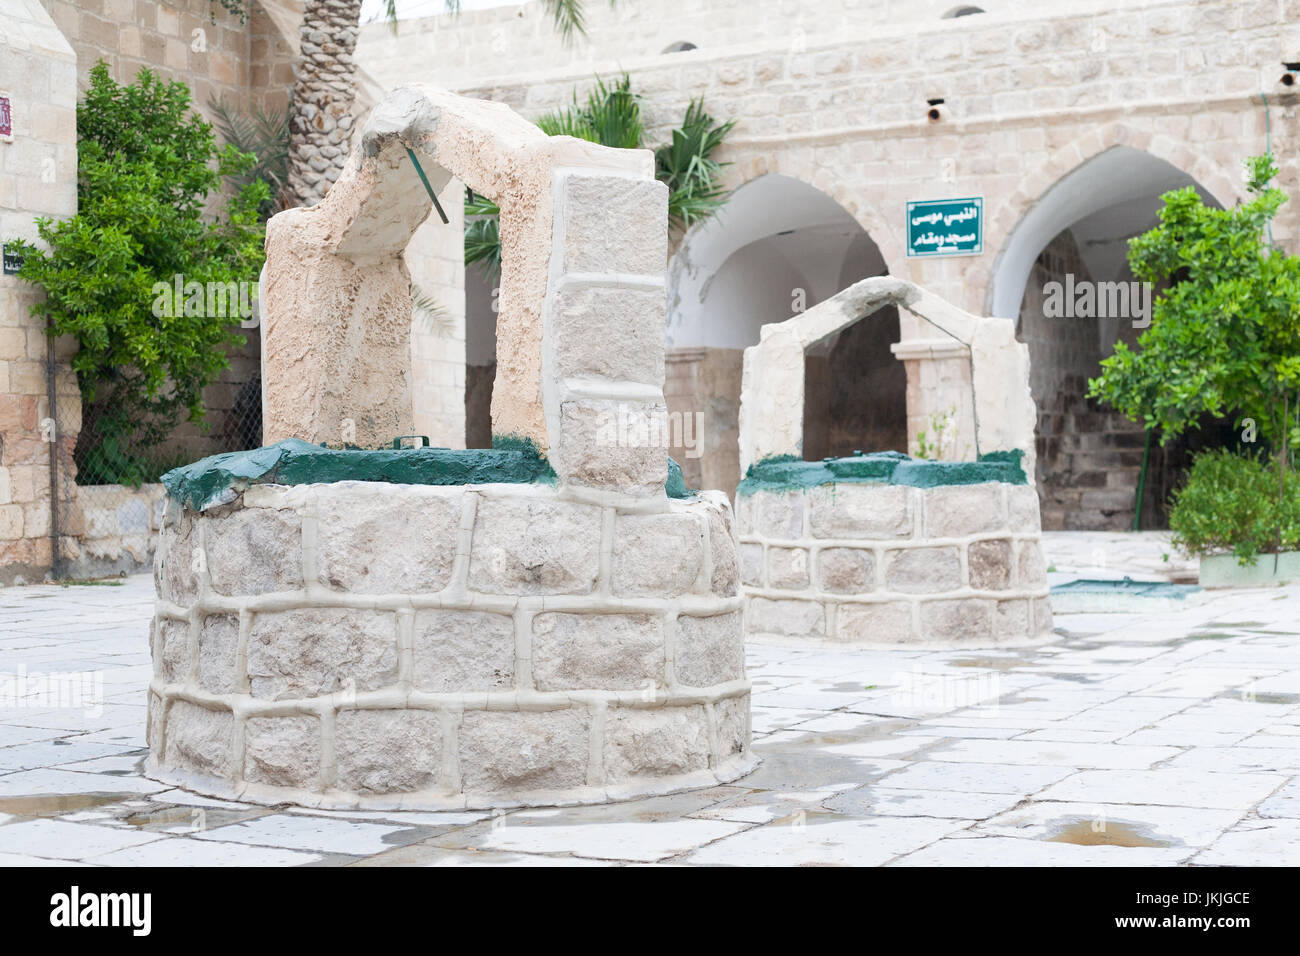 Row of Arabic White Stone Wells in interior mosque courtyard in palestine israel west bank Stock Photo